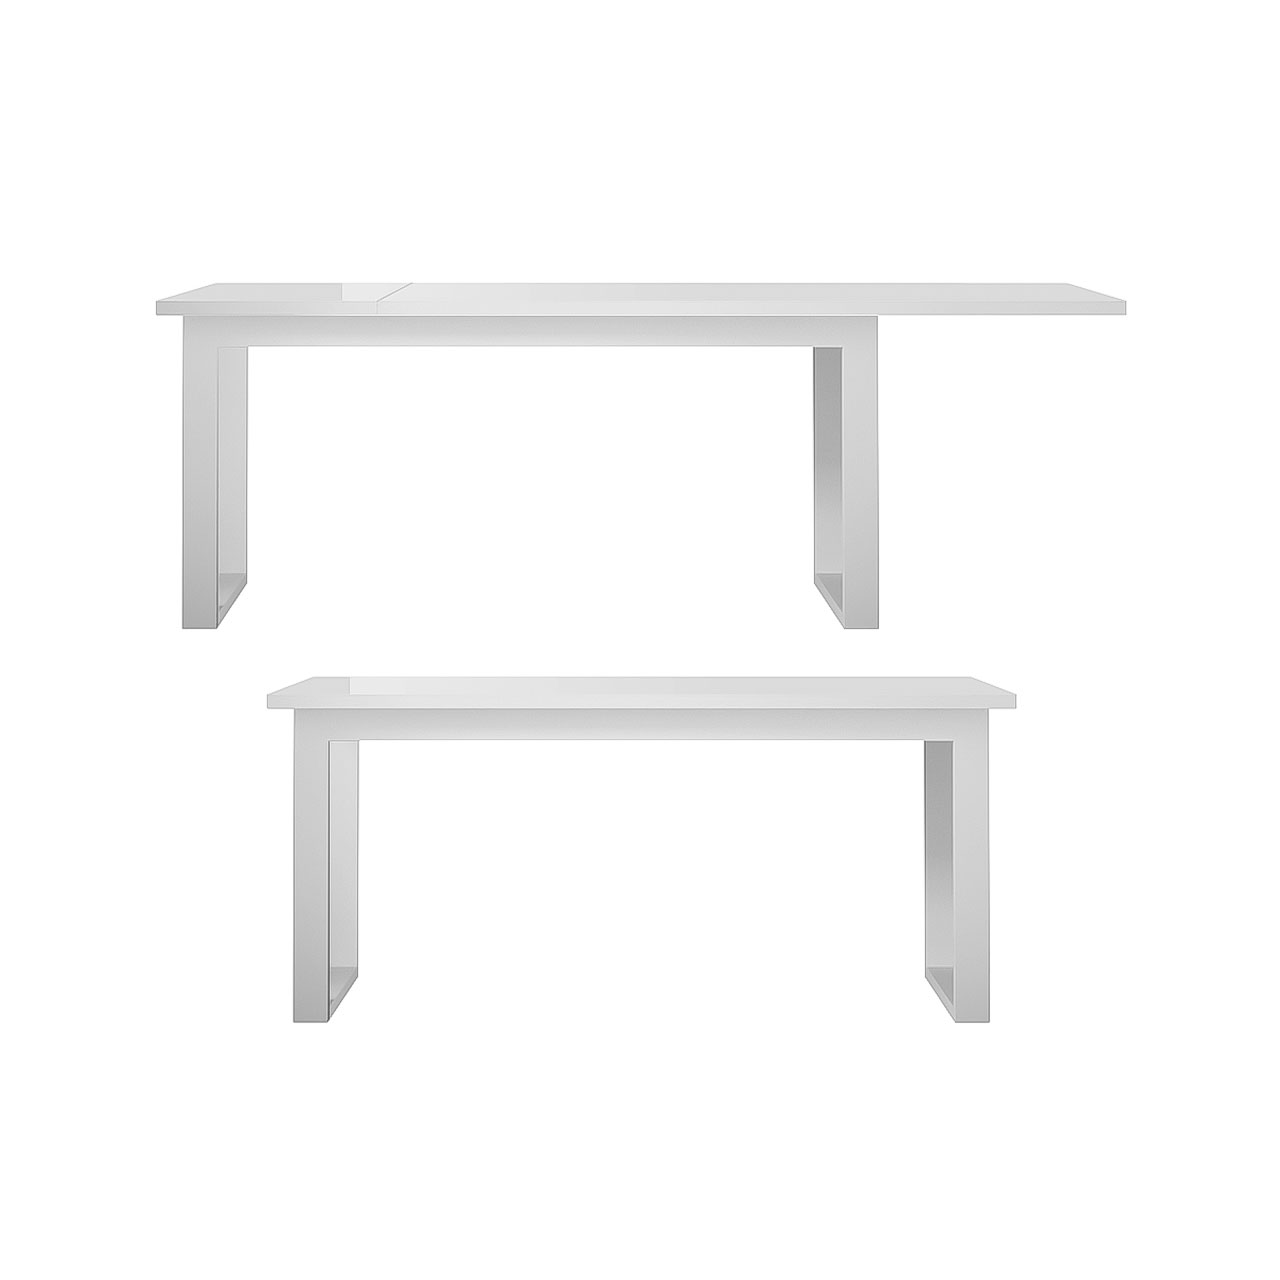 Extendable dining table HELIO HE92 white / white glass SALE